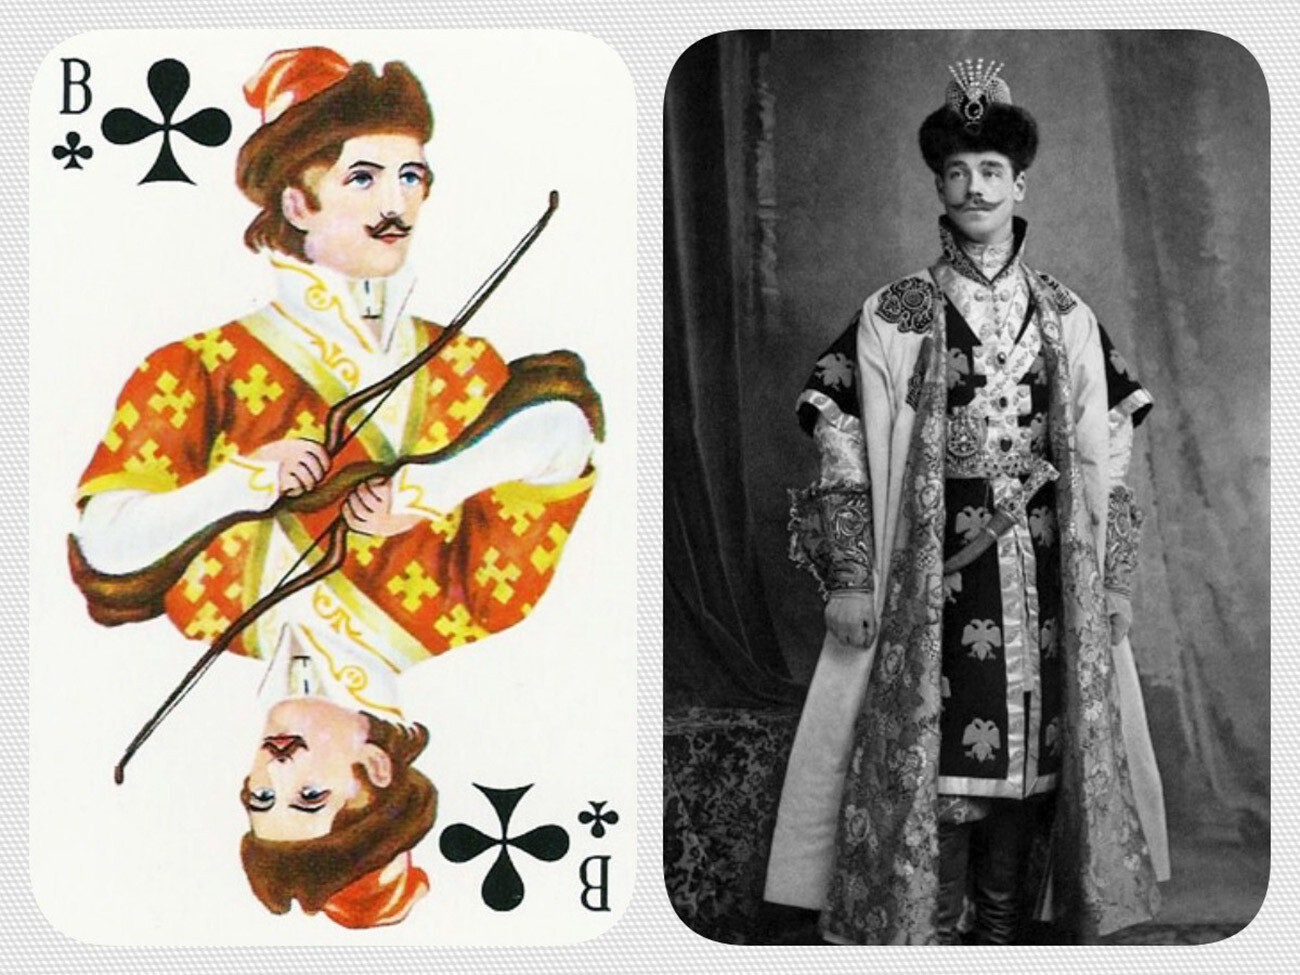 The image of Michael at a 1903 costume ball was used as the prototype of the Jack of Clubs in the famous “Russian Style” pack of playing cards.